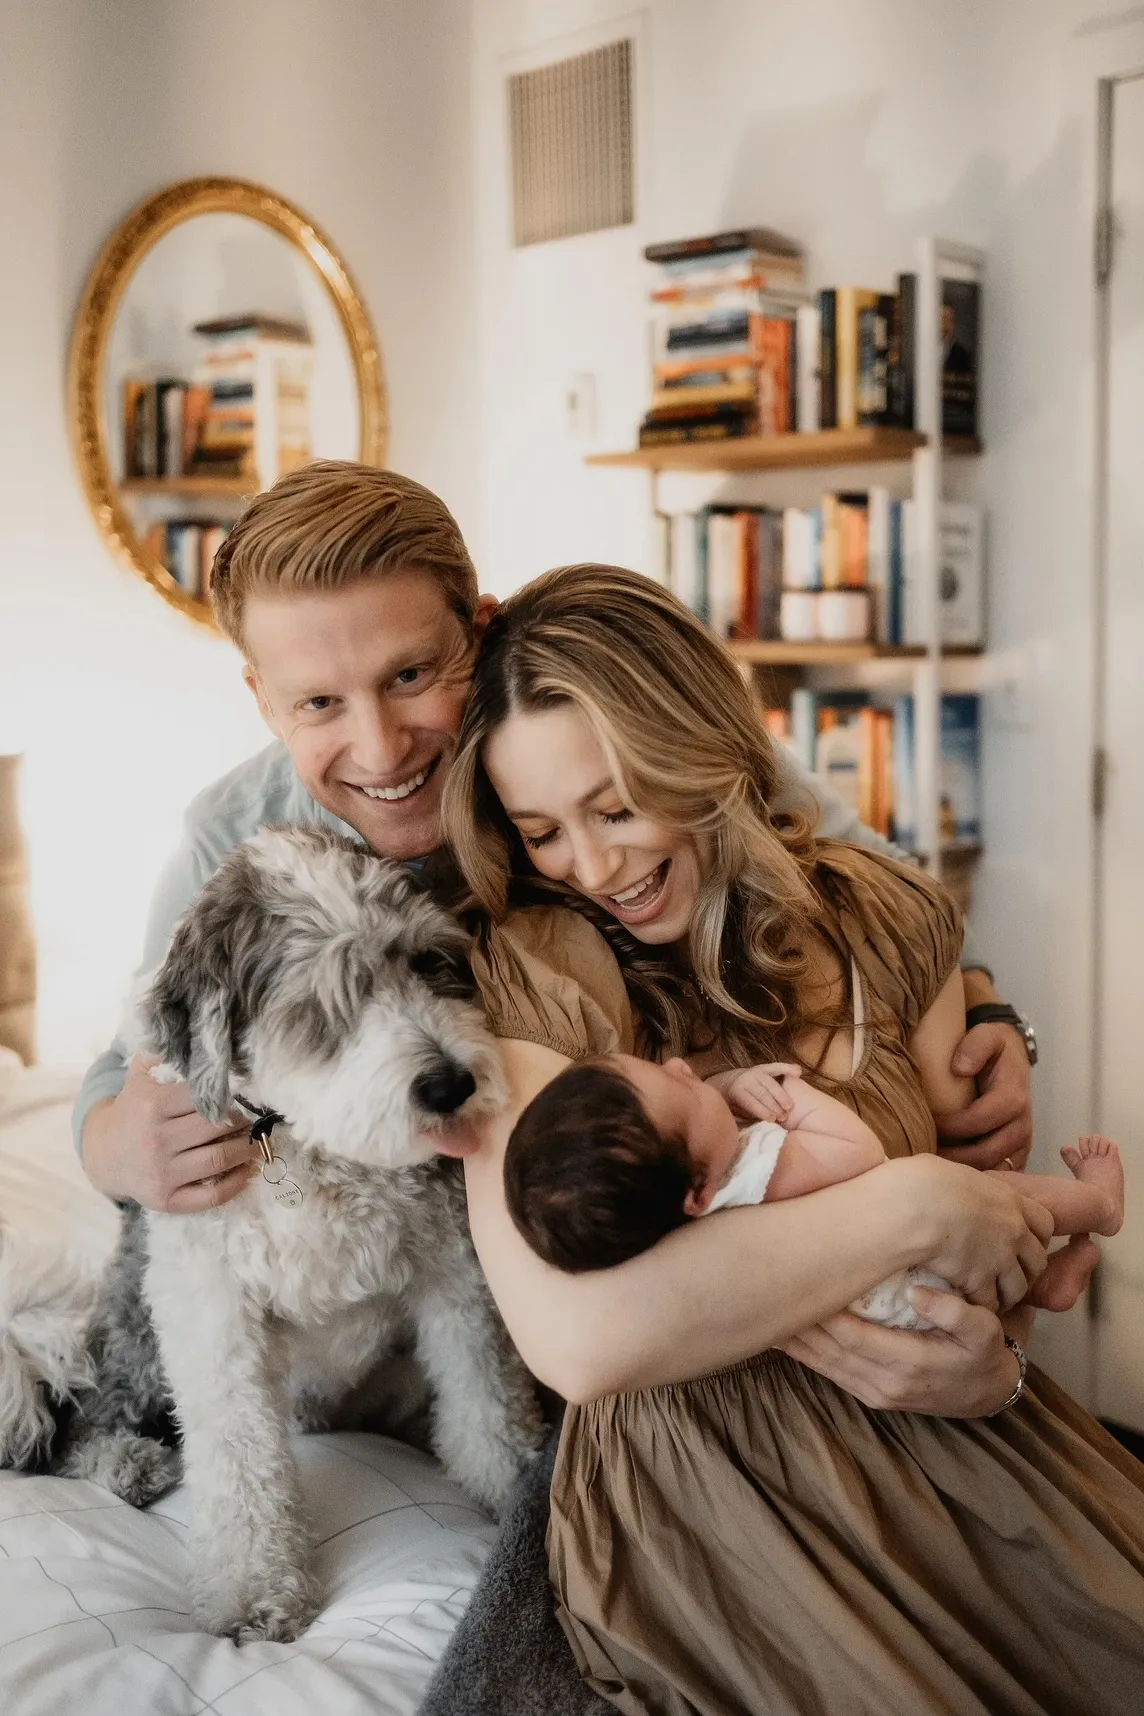 A smiling family with a father, mother, baby, and dog